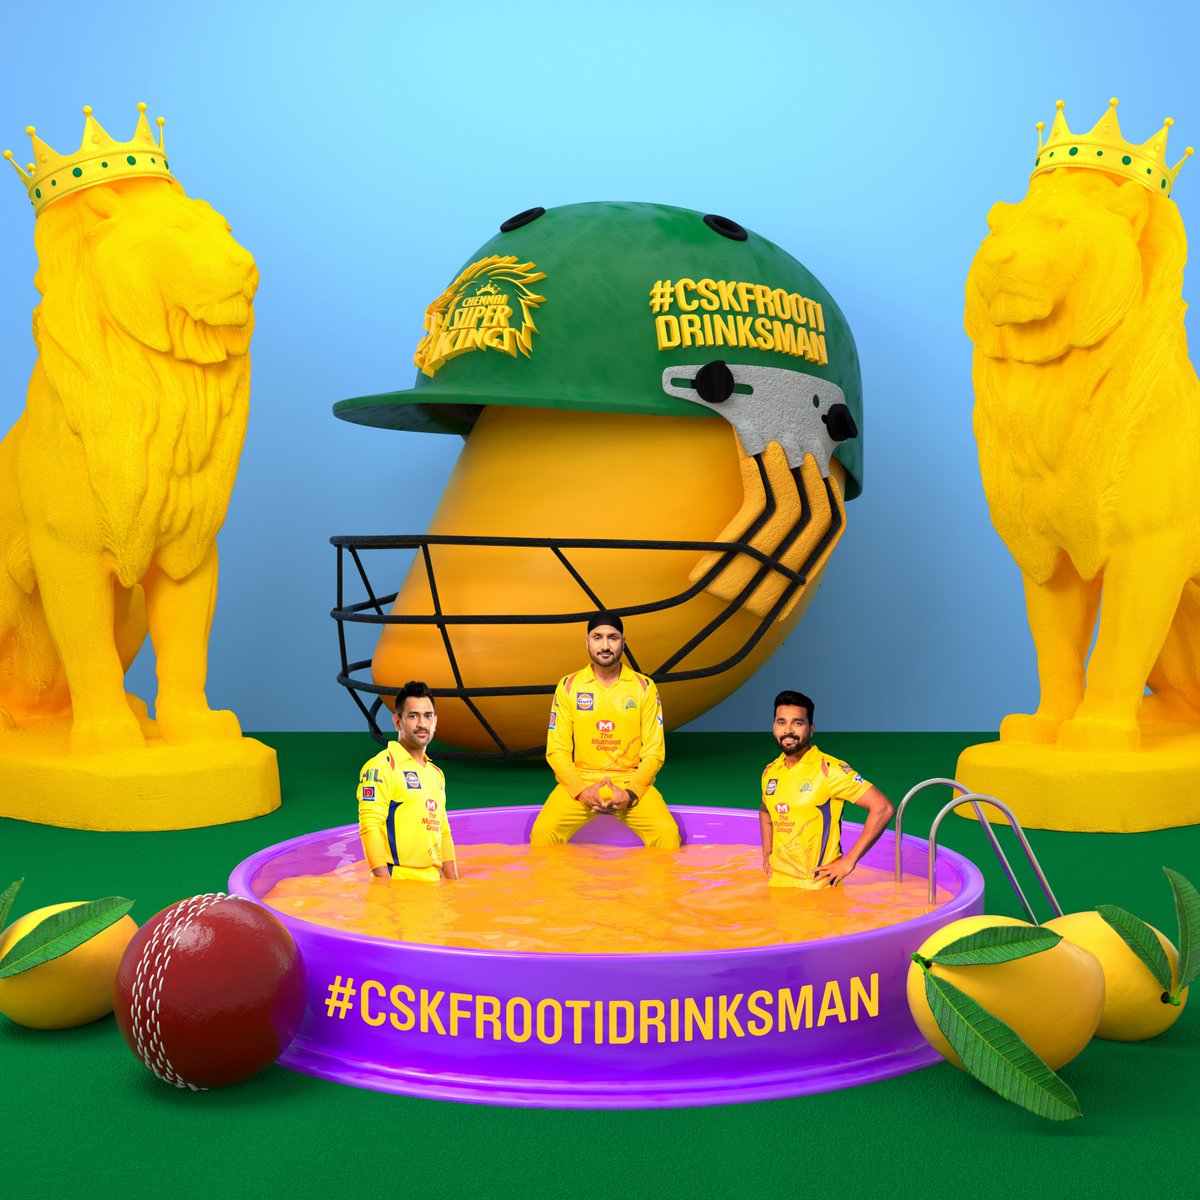 (1/2) We are back with our next contest for the #CSKFROOTIDRINKSMAN. Go to your Instagram, Twitter or Facebook to post a photo telling us why you or your friend are the best candidate! To enter, tag @Frooti on Twitter.